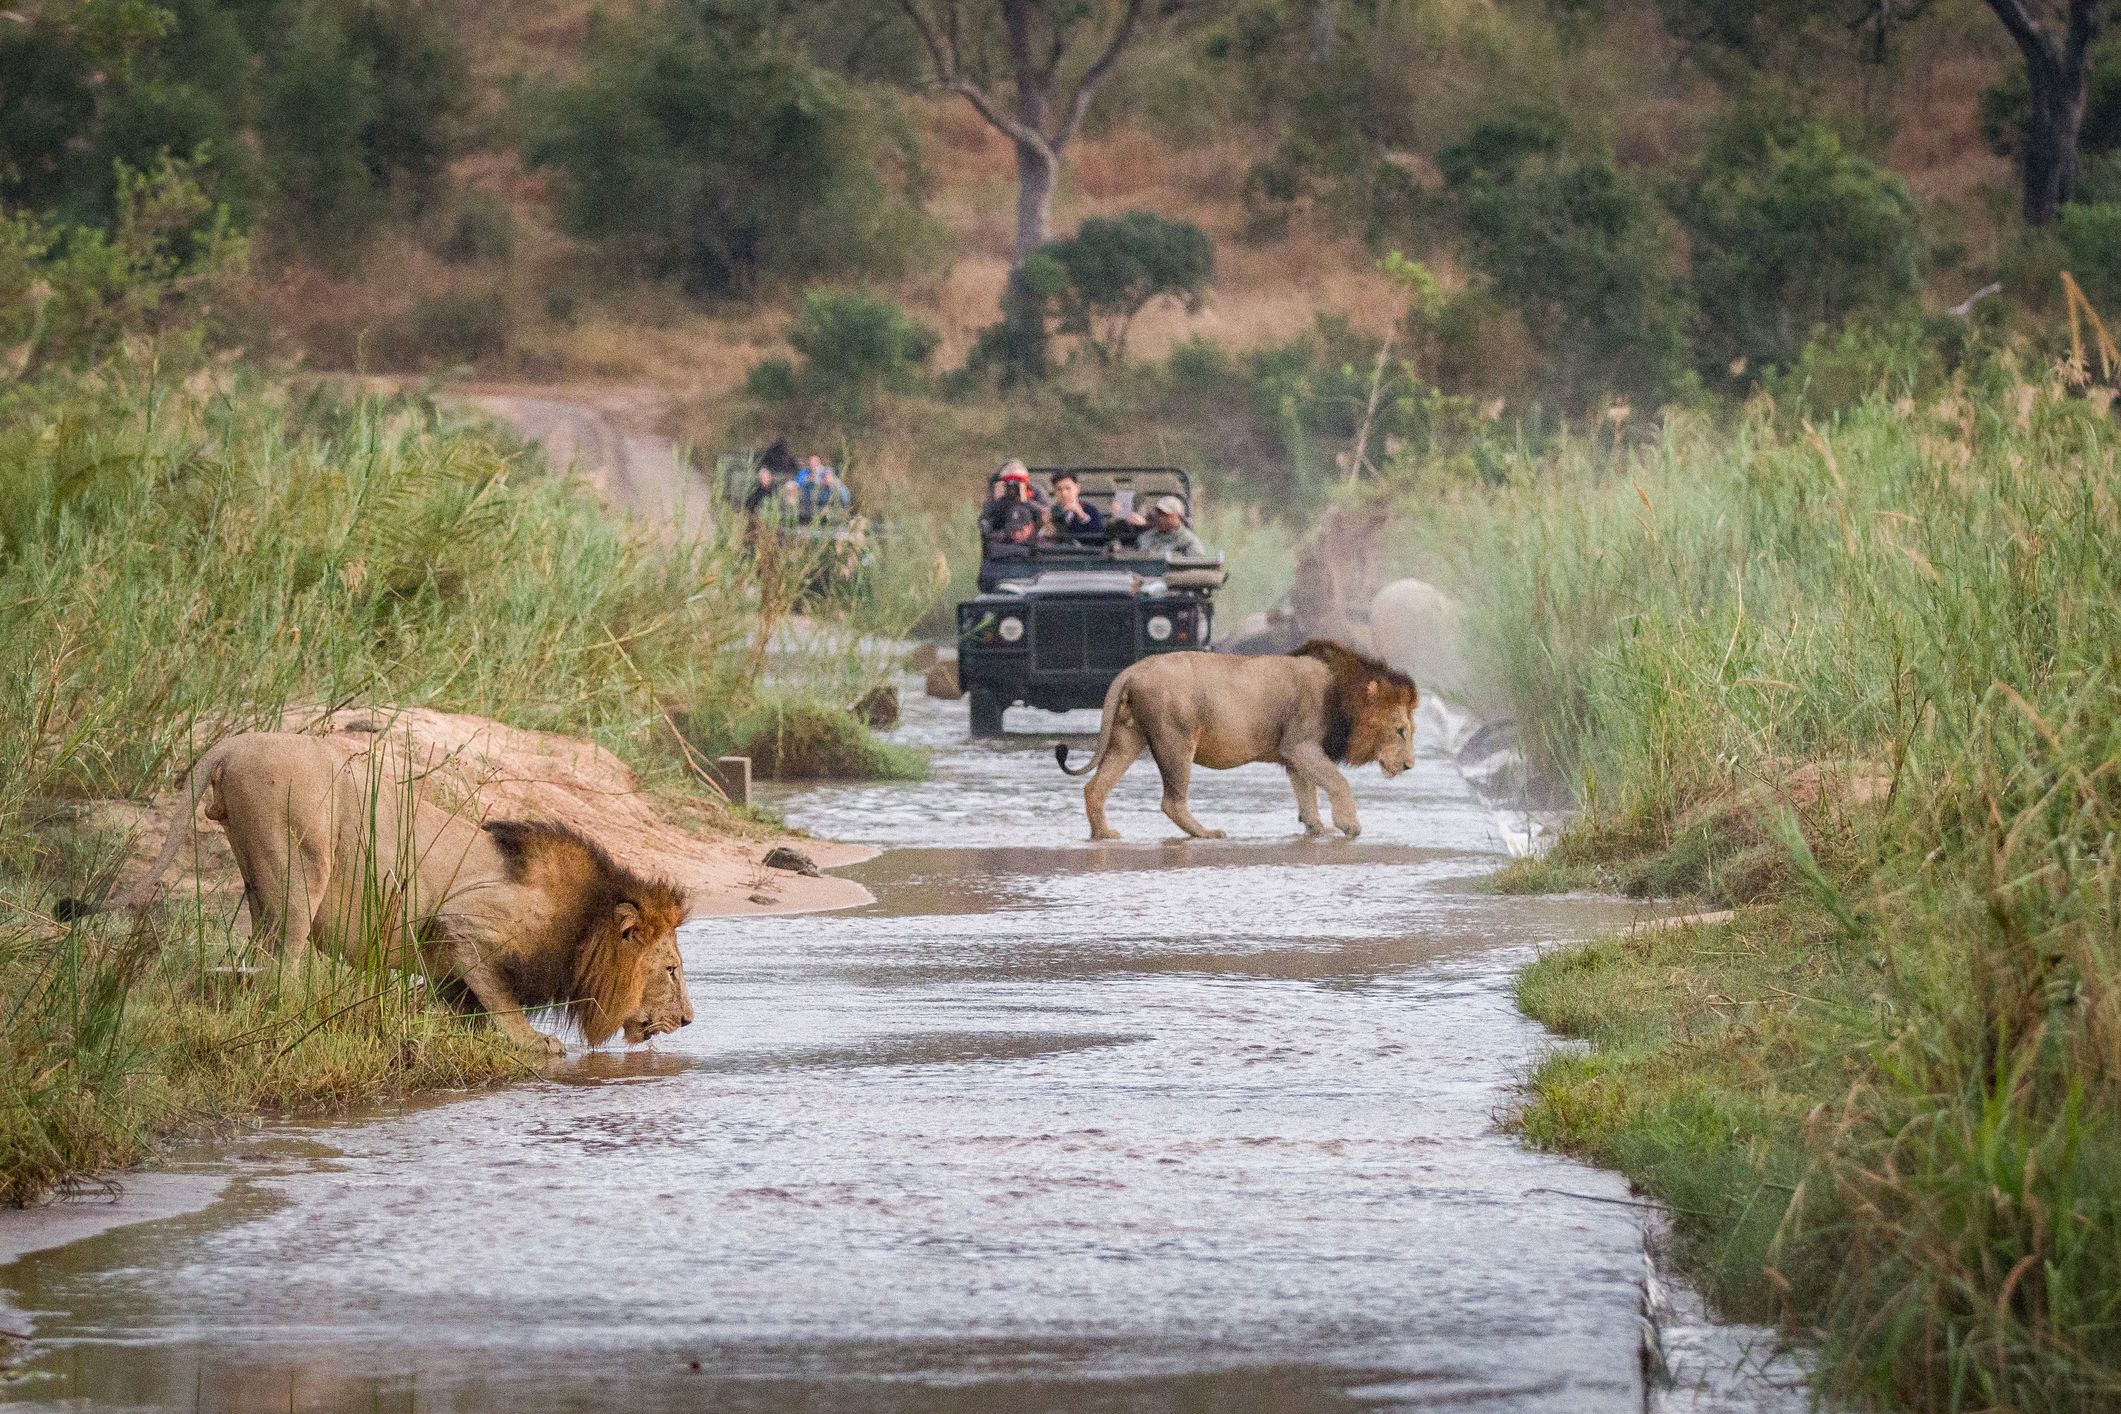 Two male lions, Panthera leo, walk across a shallow river, one crouching drinking water, two game vehicles in backgrounf carrying people